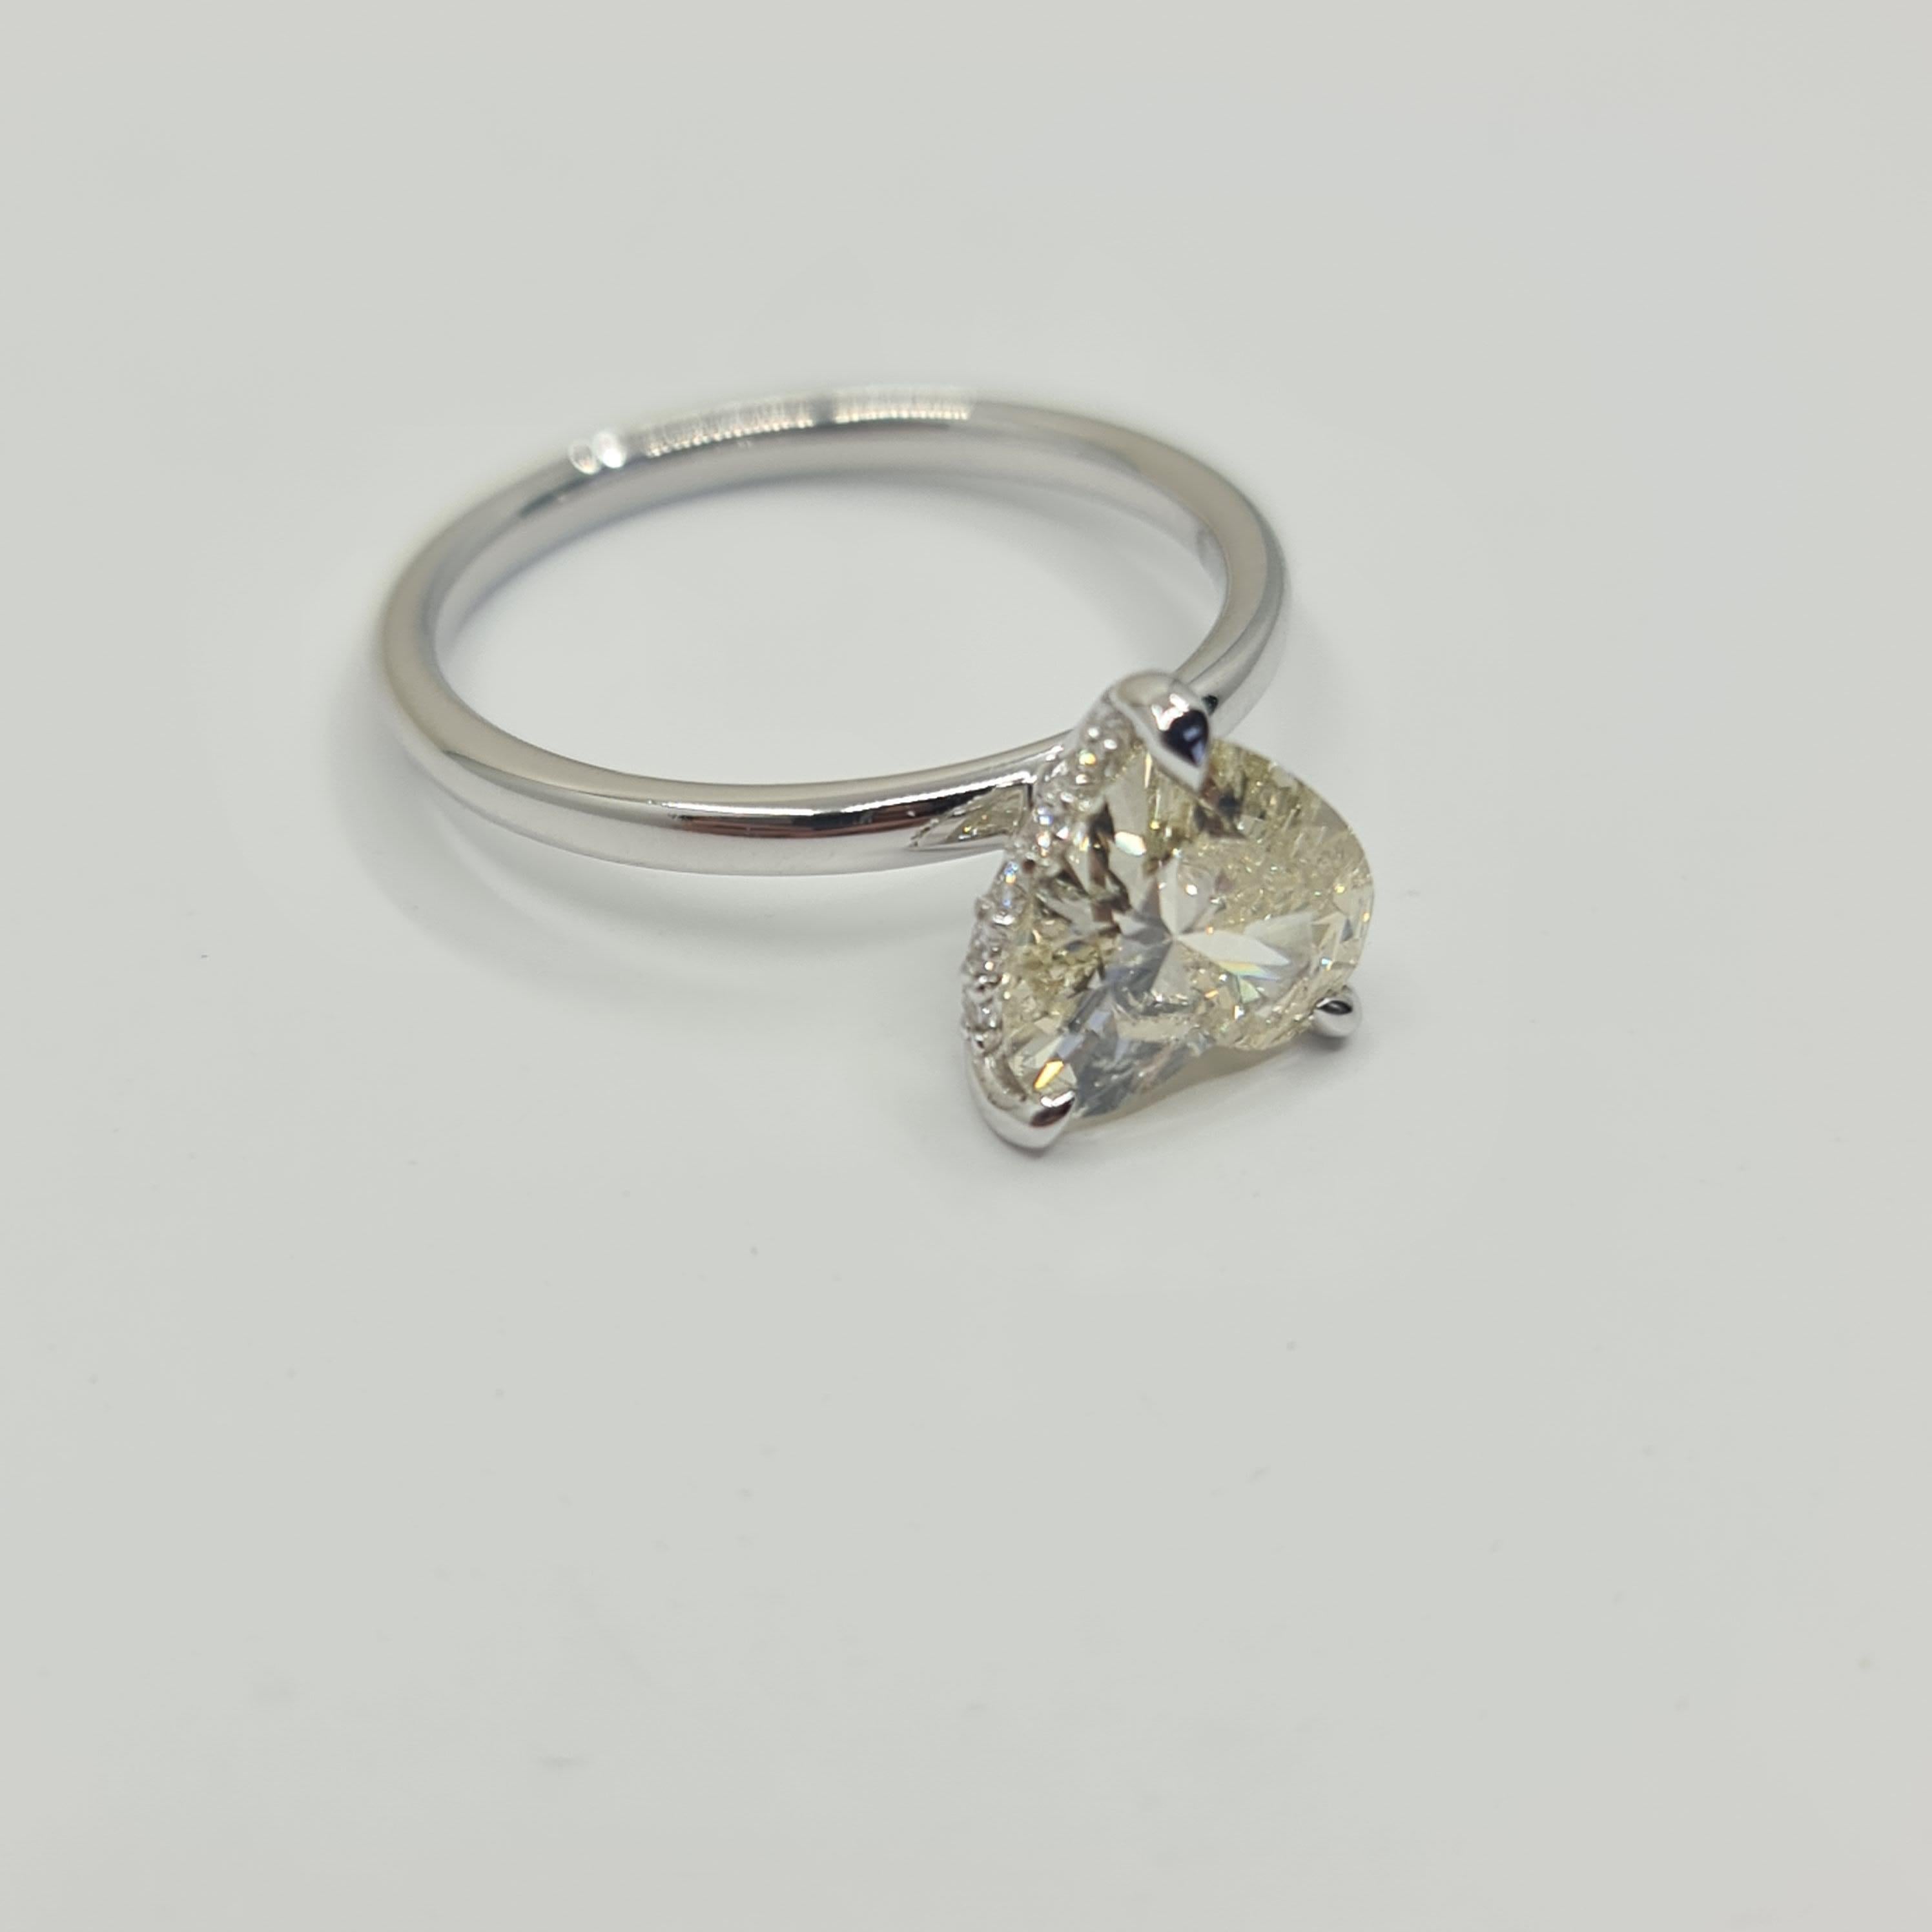 Exquisite GIA Certified 1.60 Carat Heart Diamond Ring with 0.07 Carat Halo G/VS For Sale 8